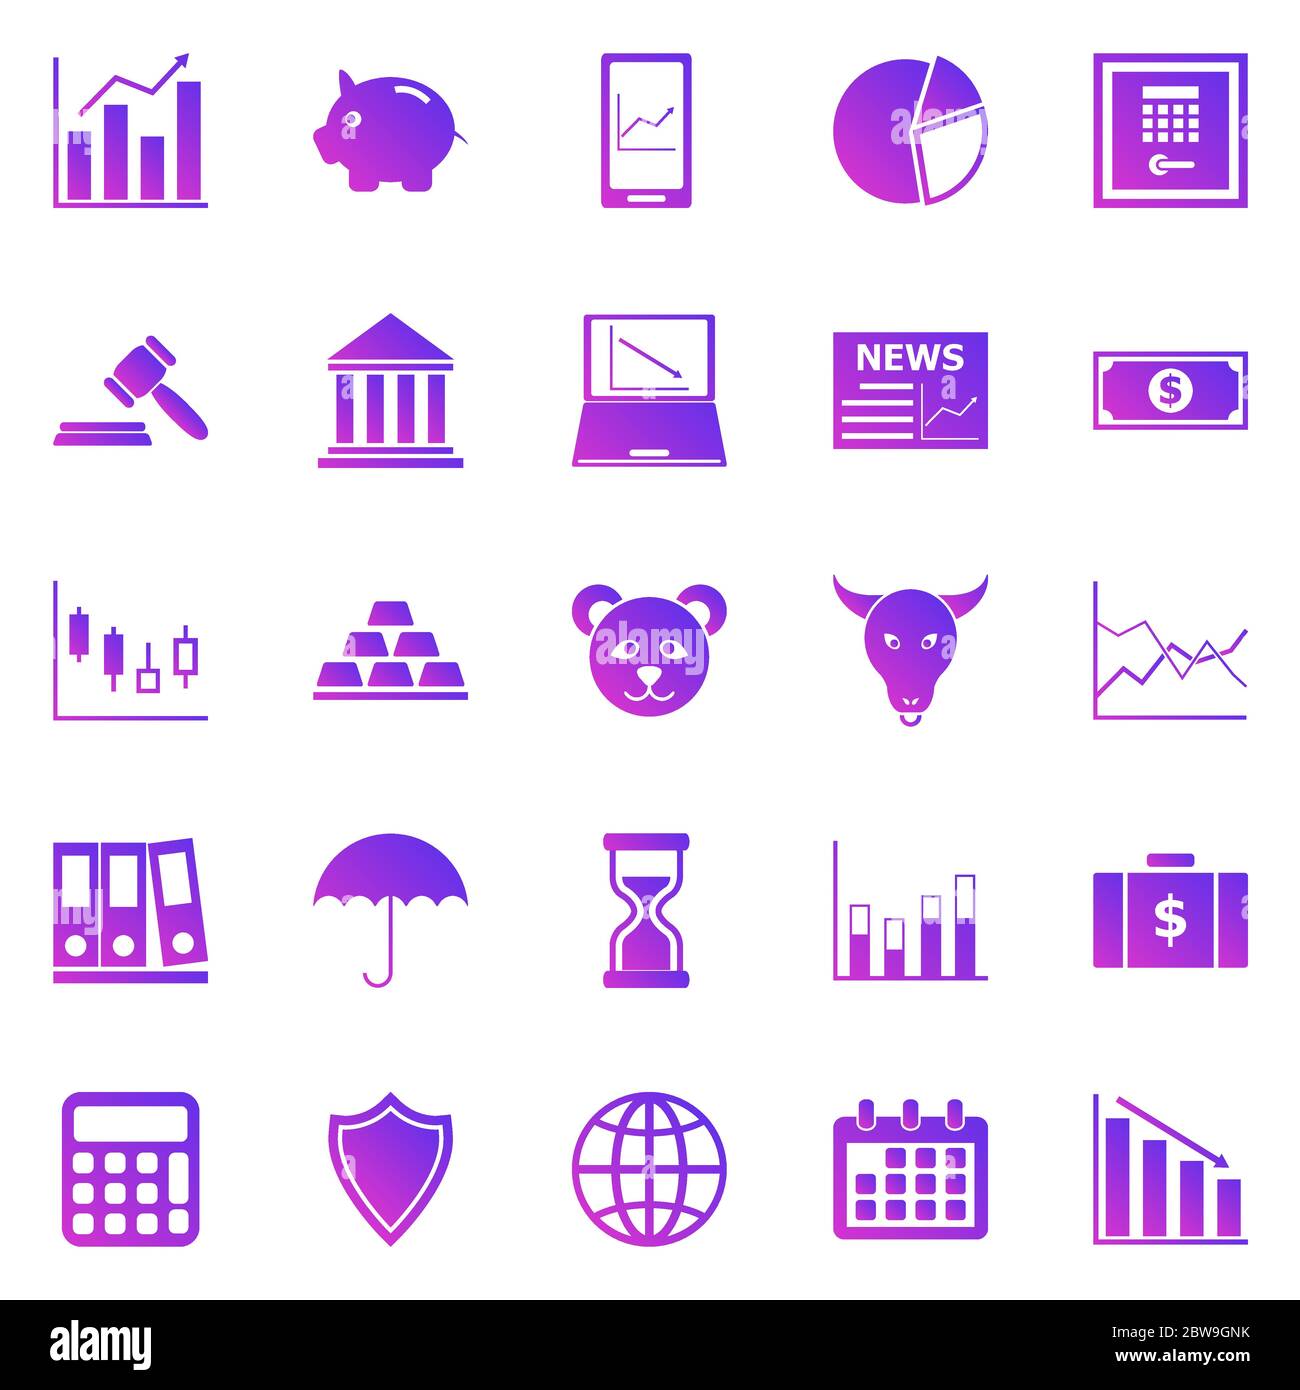 Stock market gradient icons on white background, stock vector Stock Vector